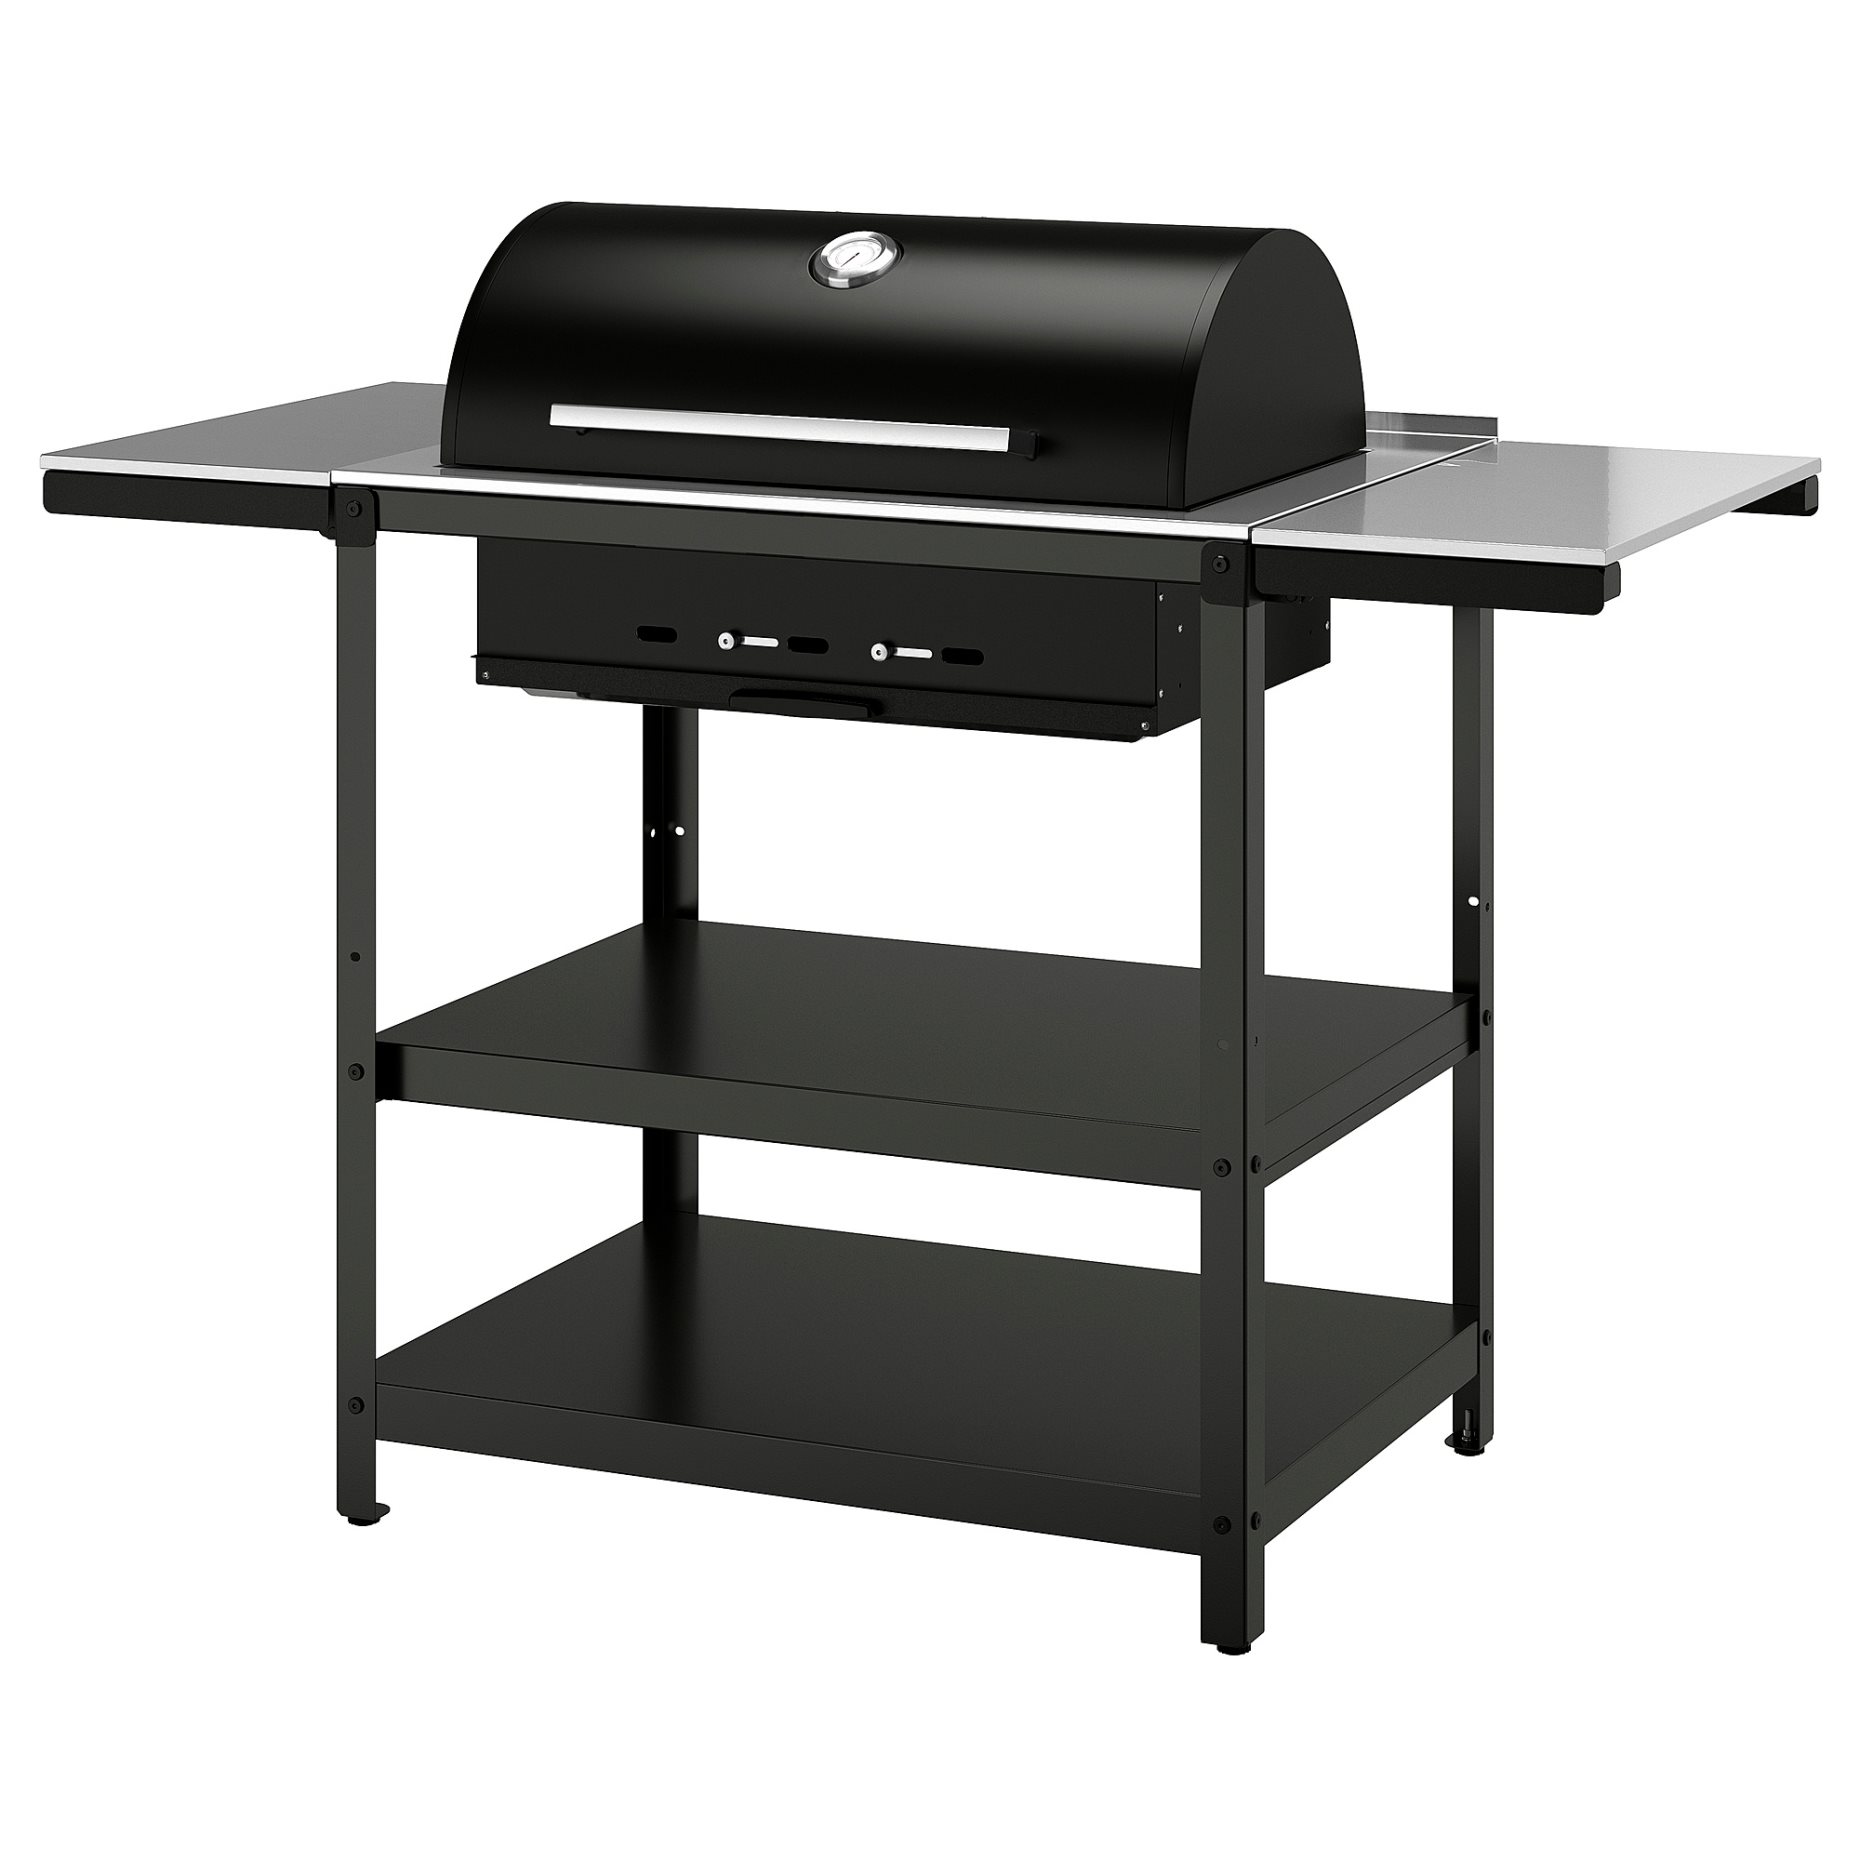 GRILLSKÄR, charcoal barbecue with 2 side tables, 994.952.24